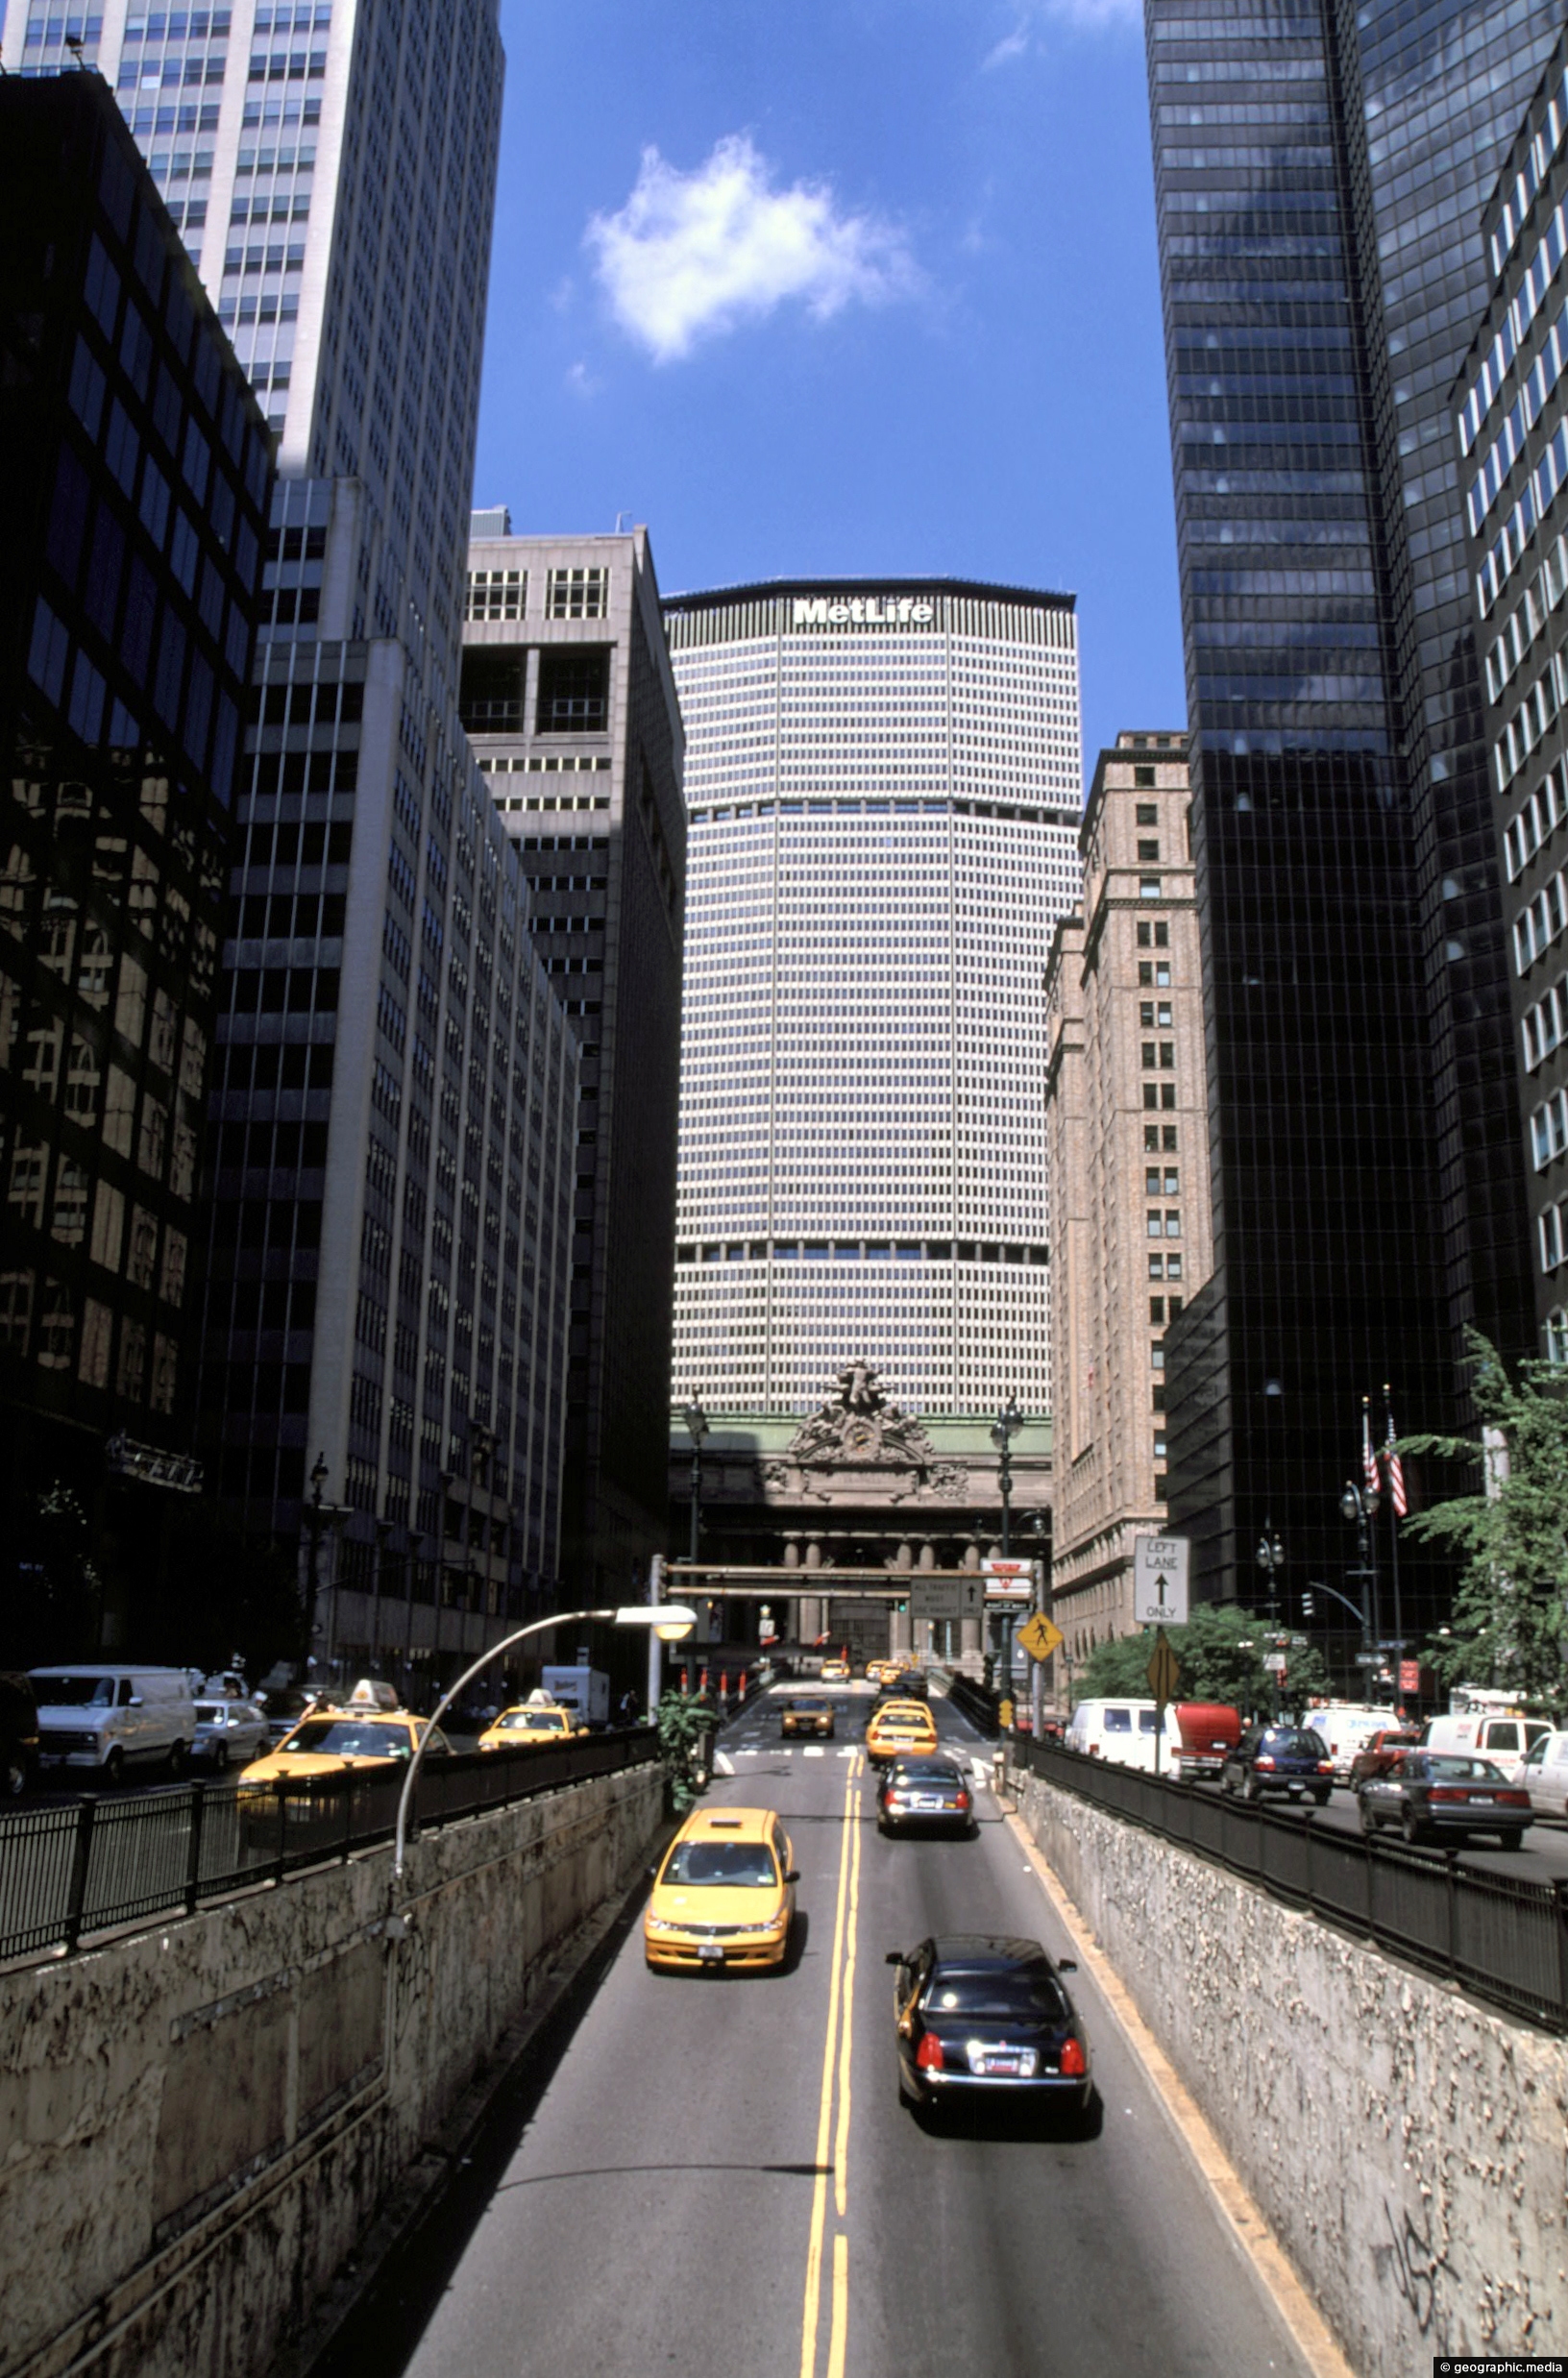 View of Wall Street in New York City